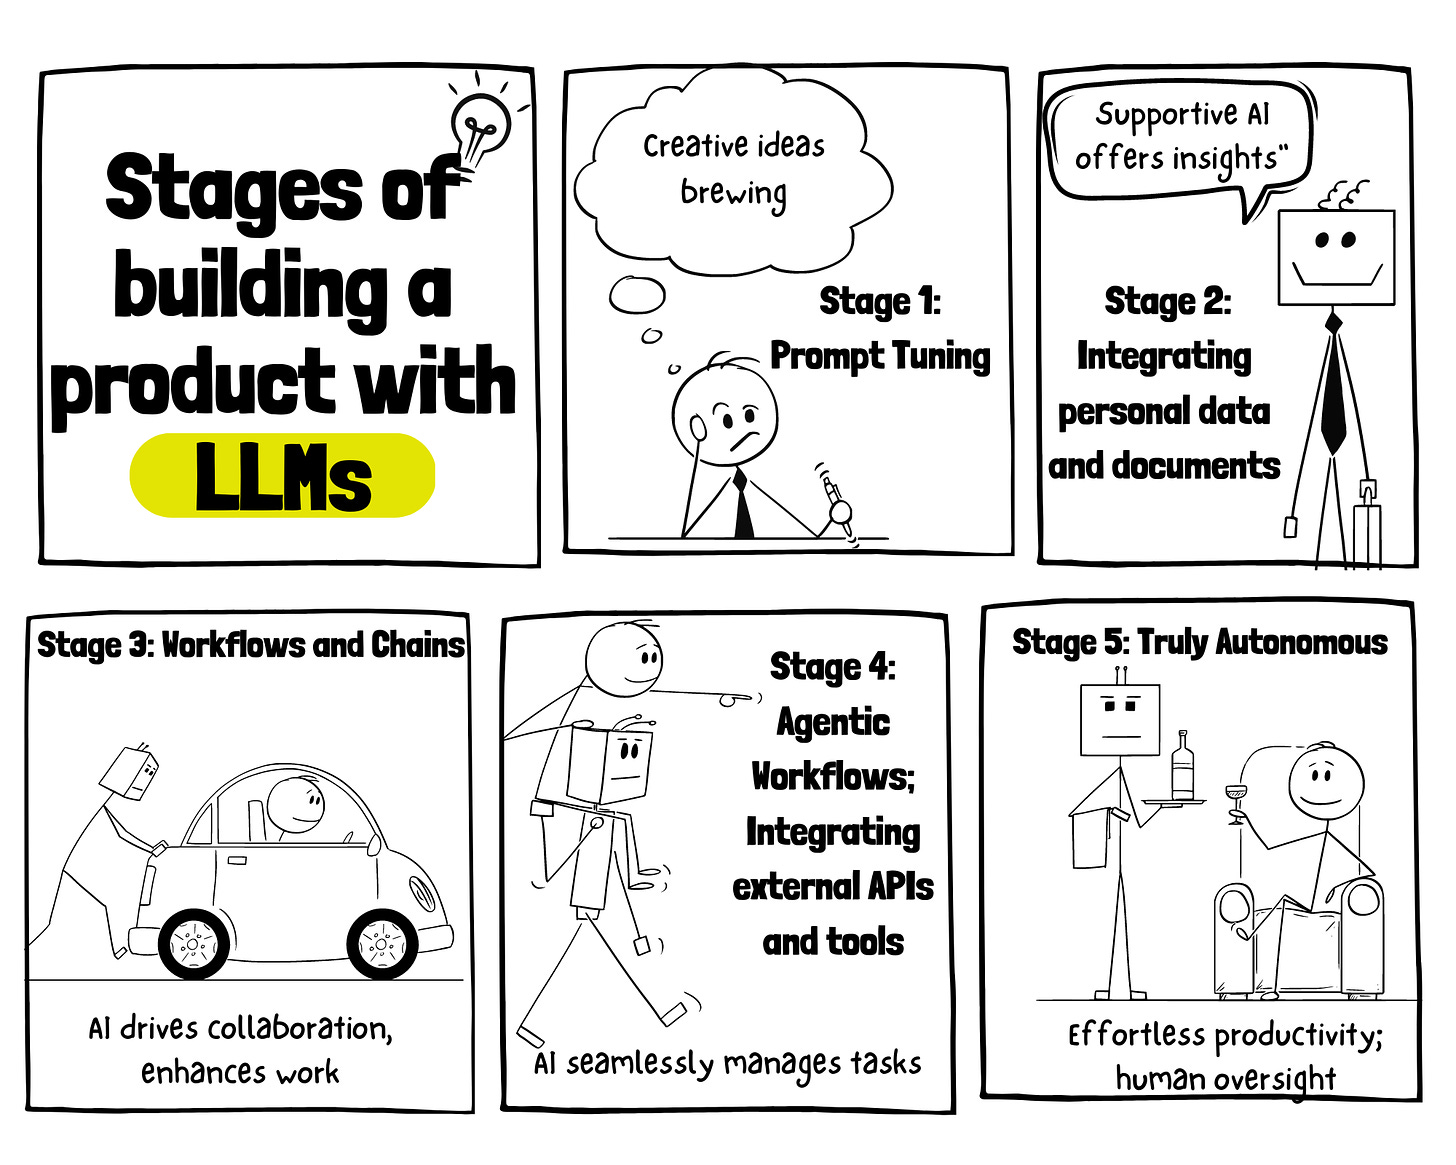 The stages of building an LLM Product